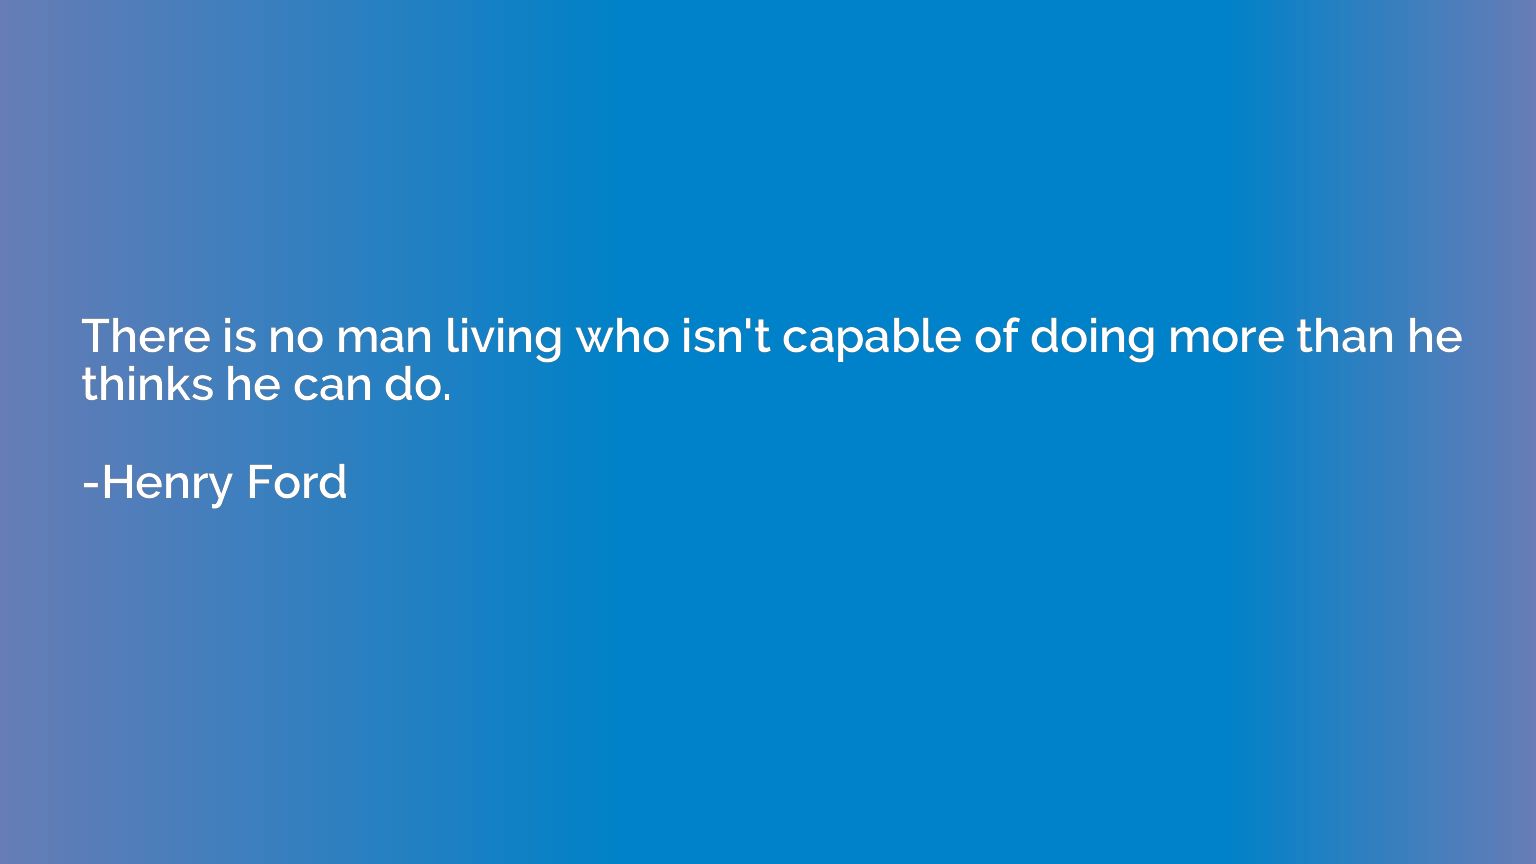 There is no man living who isn't capable of doing more than 